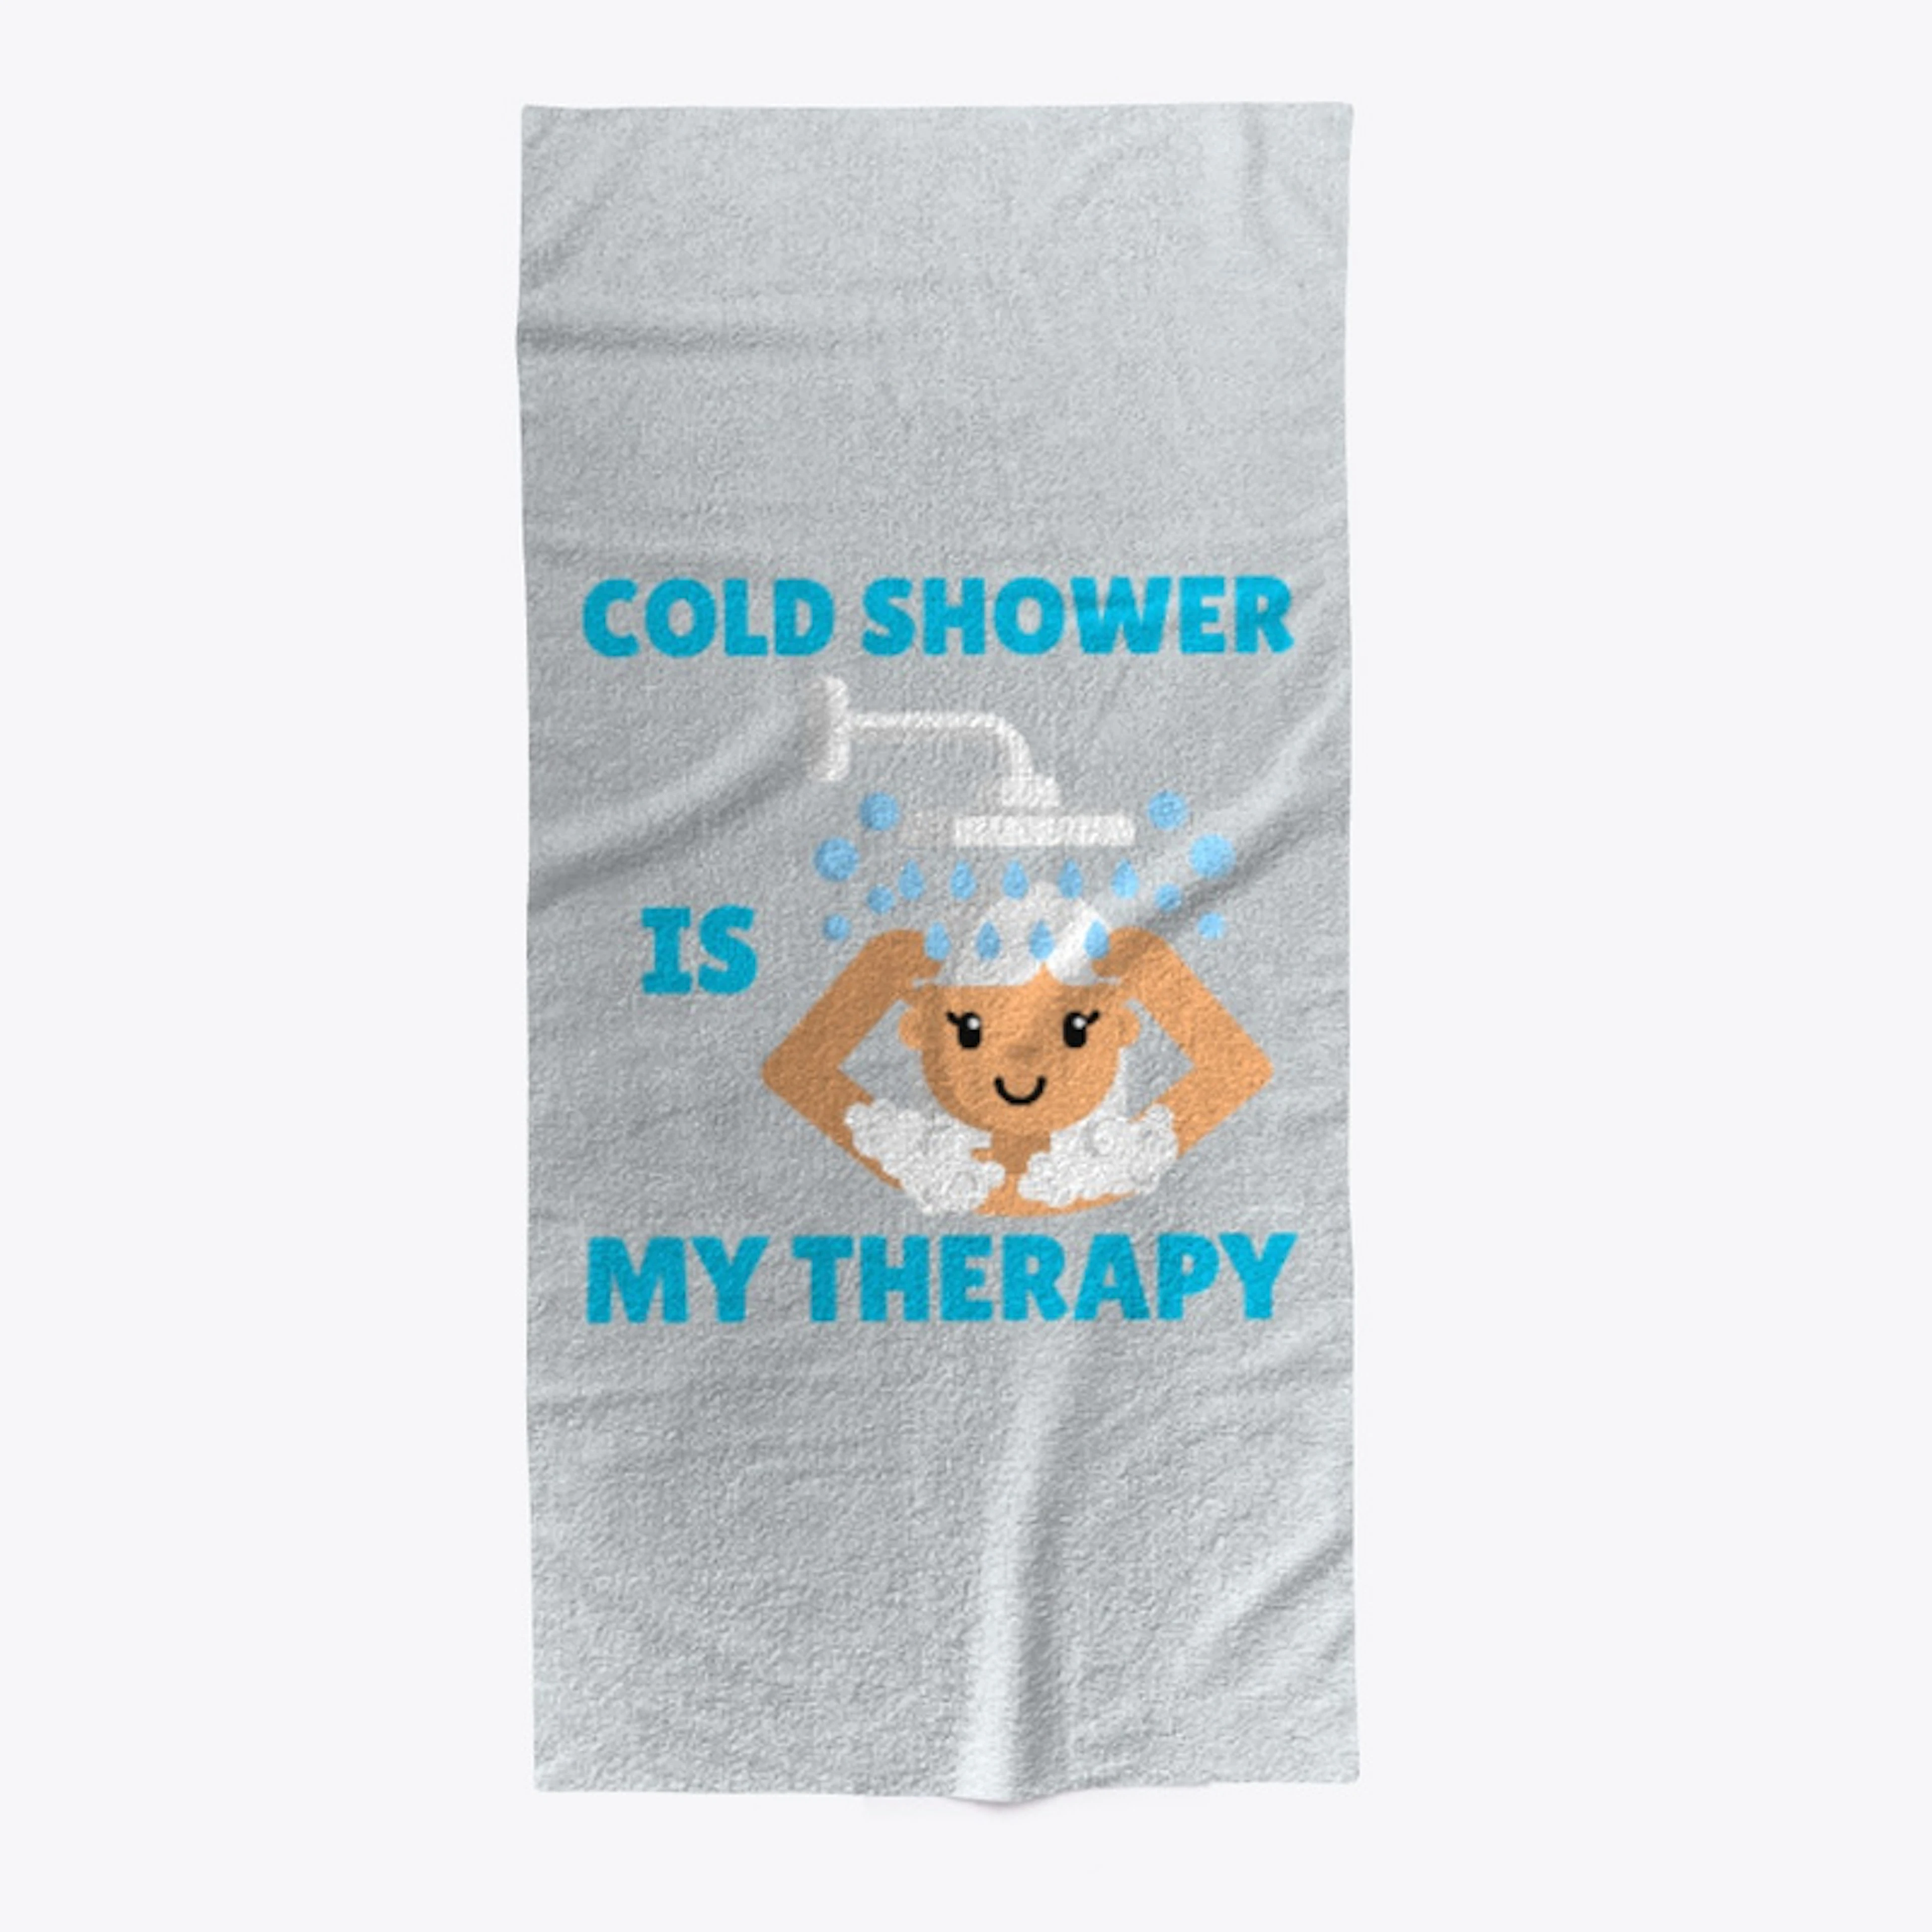 Cold shower is my therapy